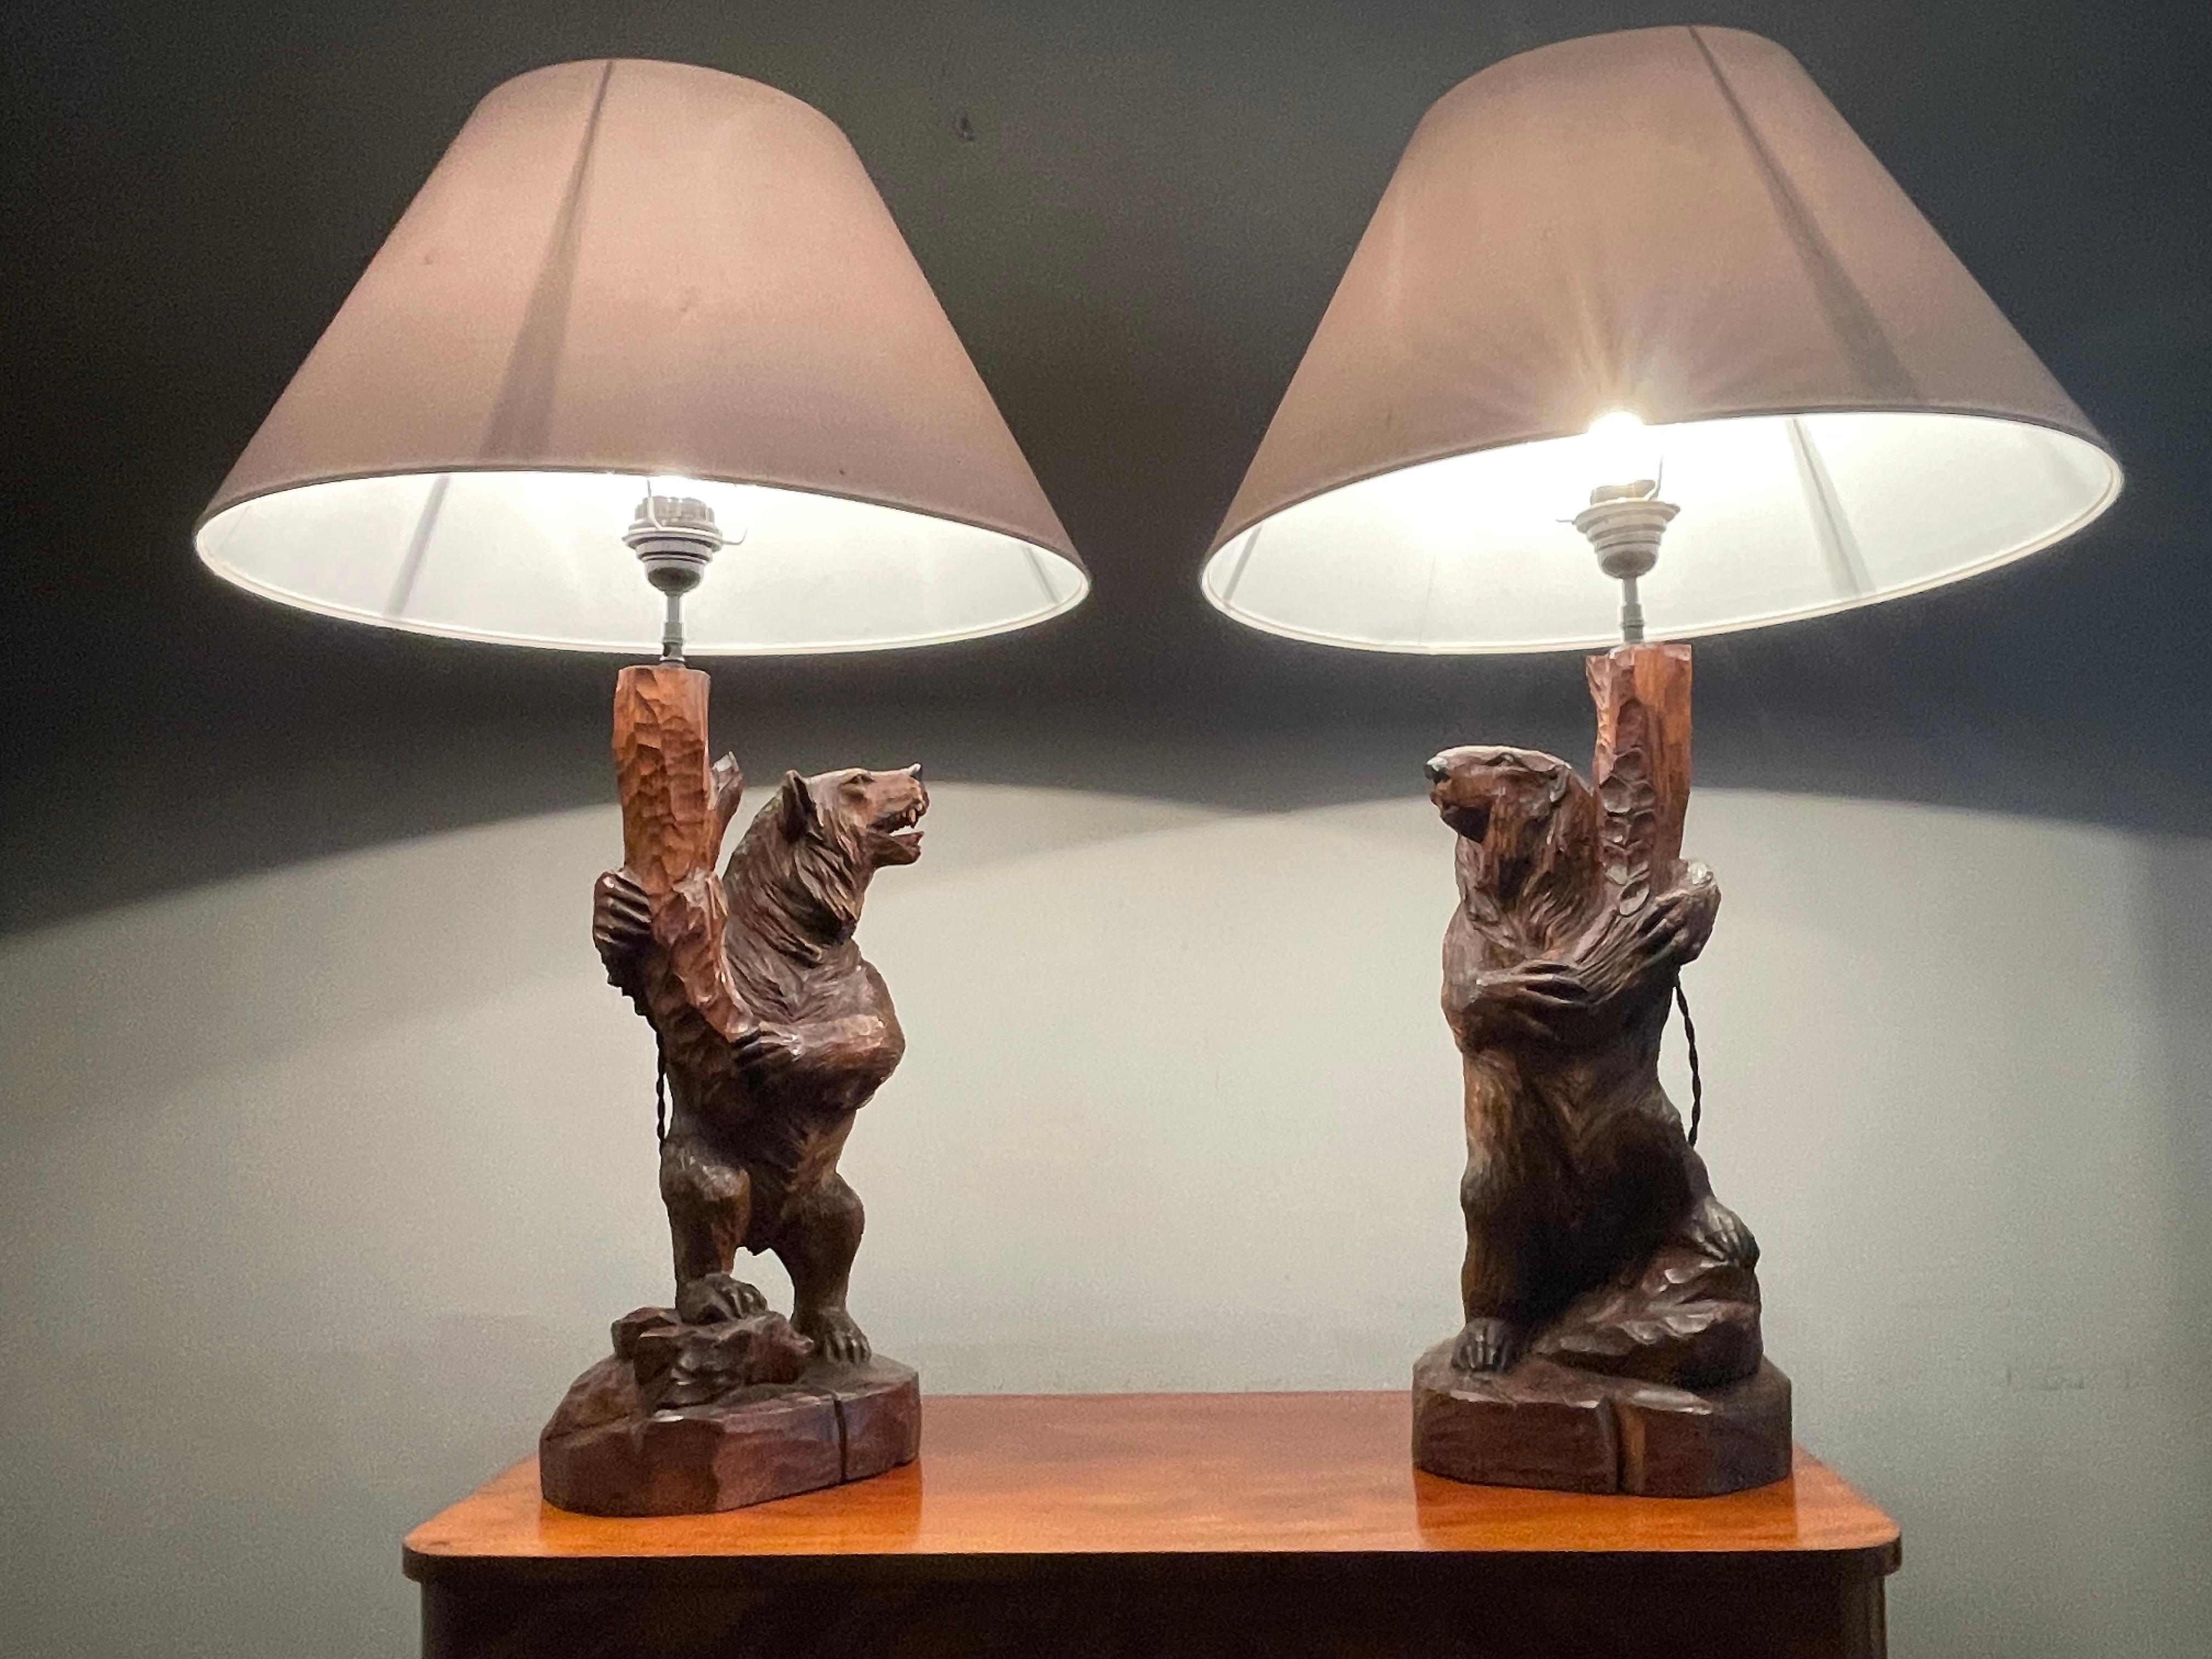 For the collectors of extremely rare Black Forest animal carvings.

With a combined 35+ years of experience in selling Black Forest antiques we have never seen a pair of table lamps and for them to be of this size, only made this find even more